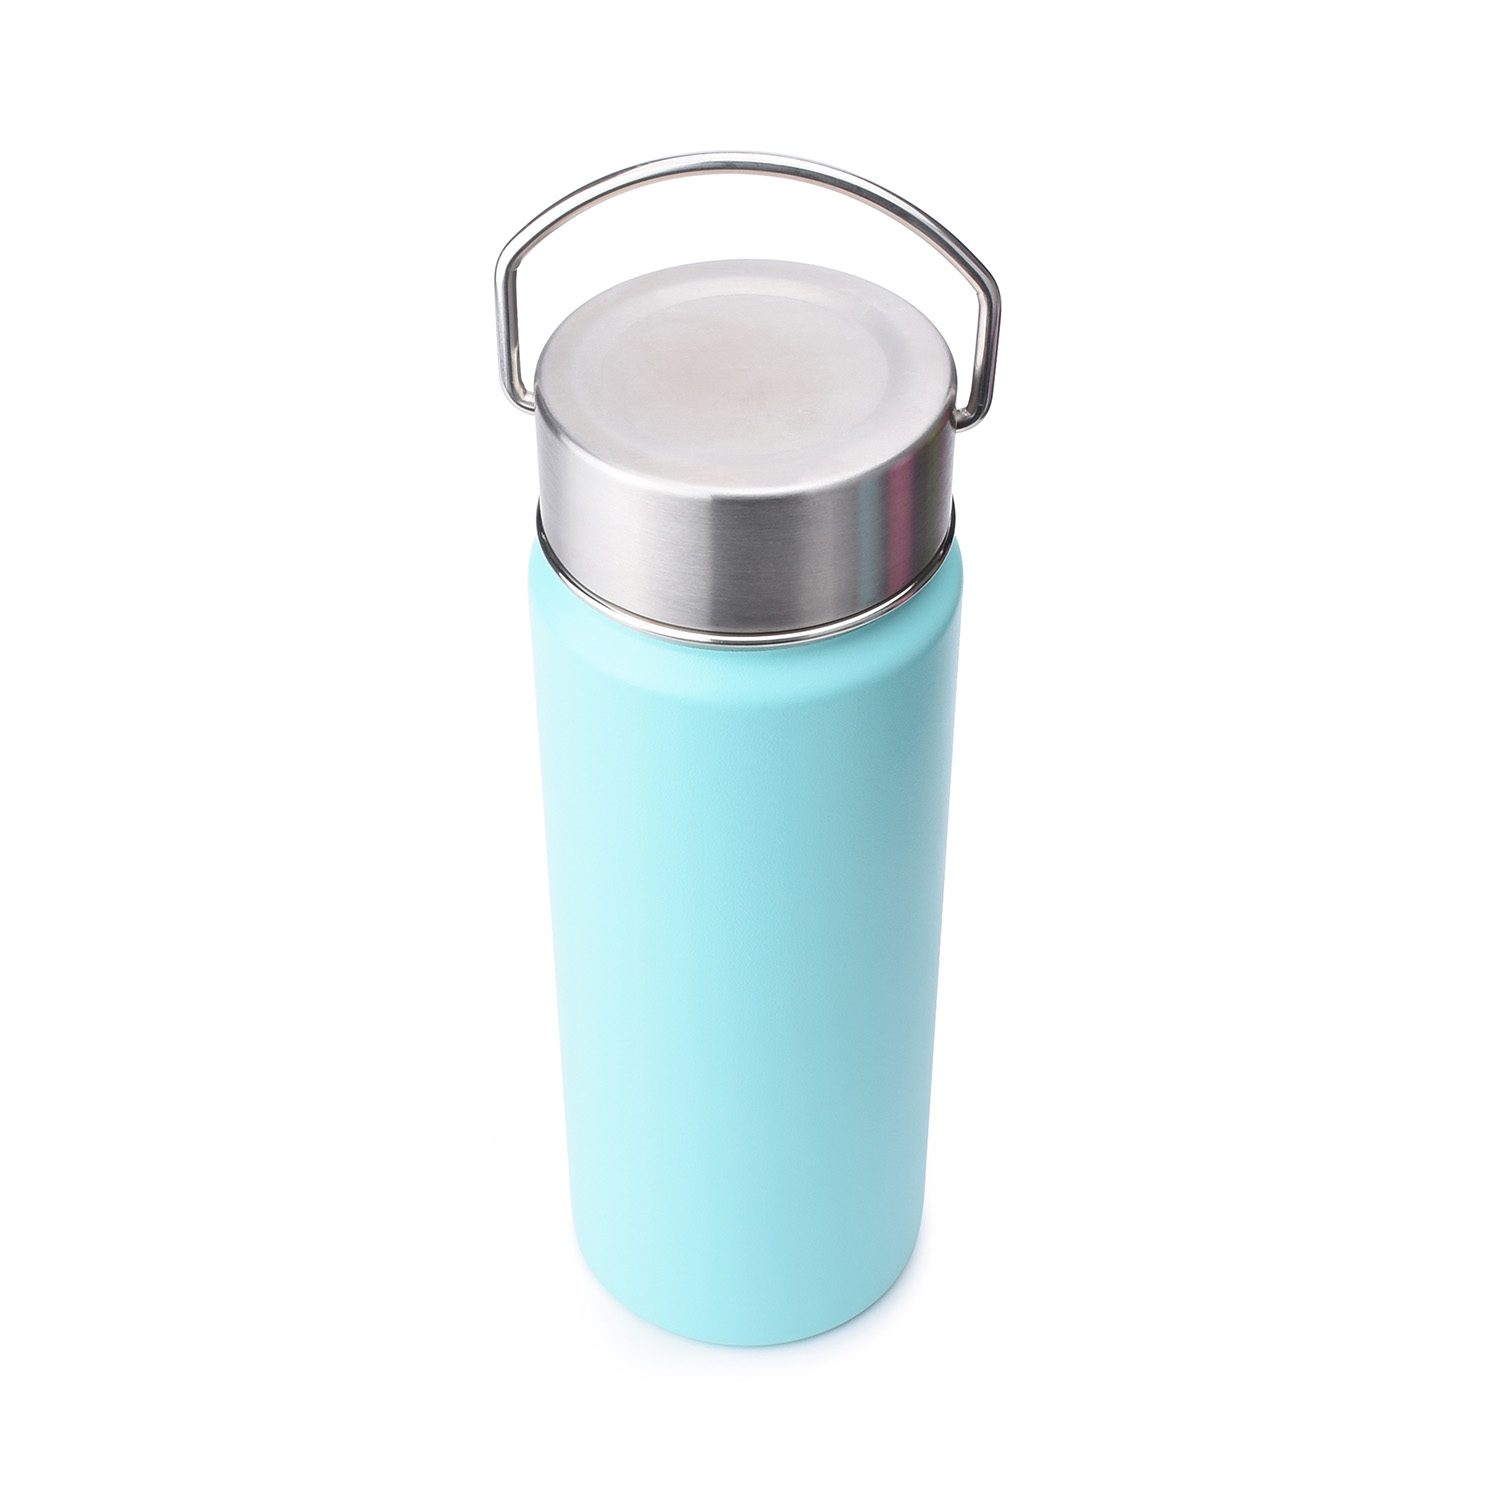 https://www.waterbottle.tech/wp-content/uploads/2018/10/wide-mouth-water-bottle-with-stainless-steel-handle-s111898-2.jpg